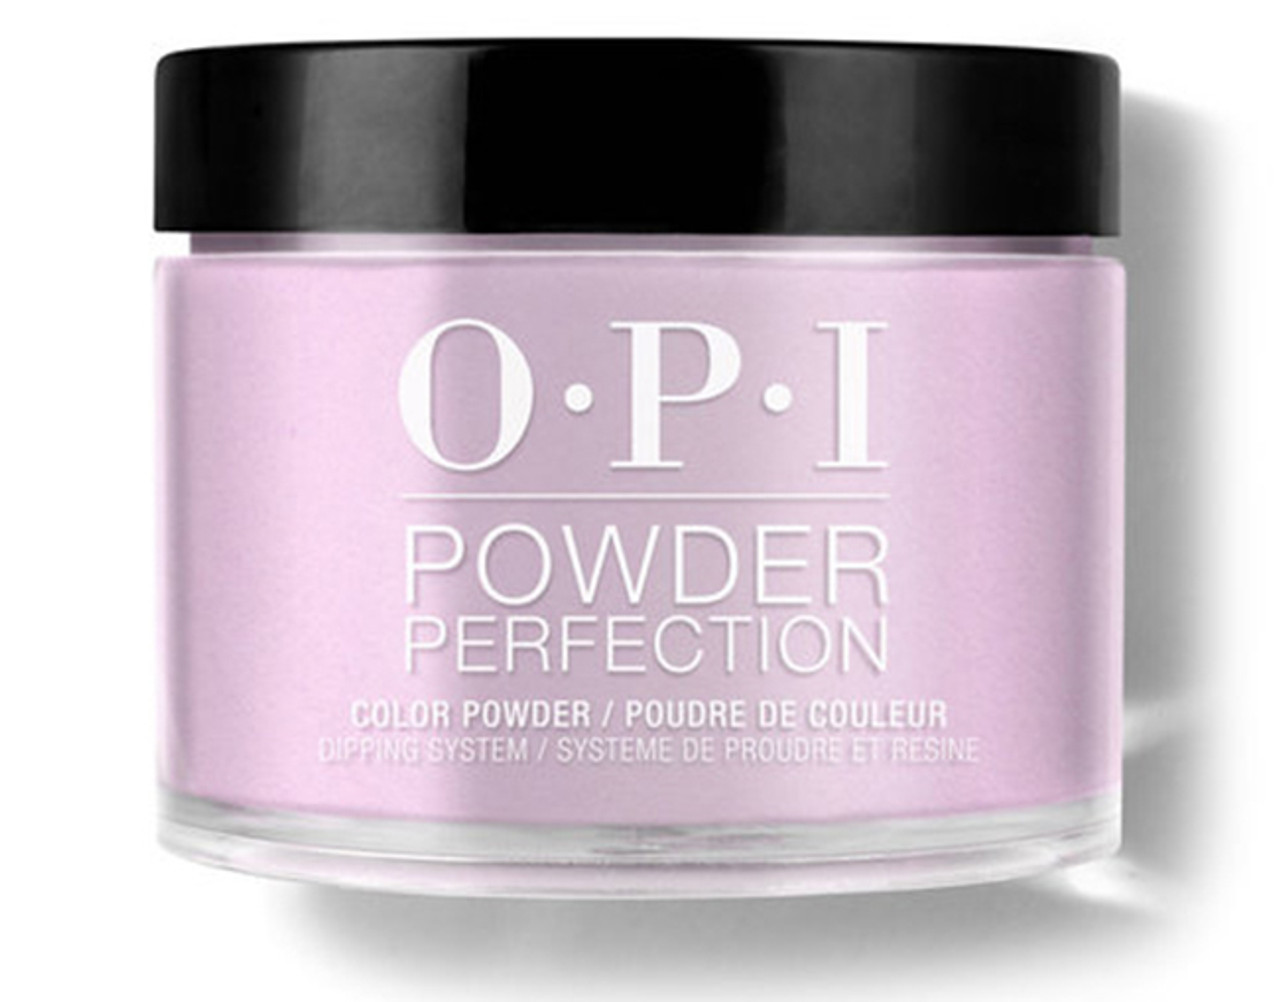 OPI Dipping Powder Perfection Do You Lilac It? - 1.5 oz / 43 G